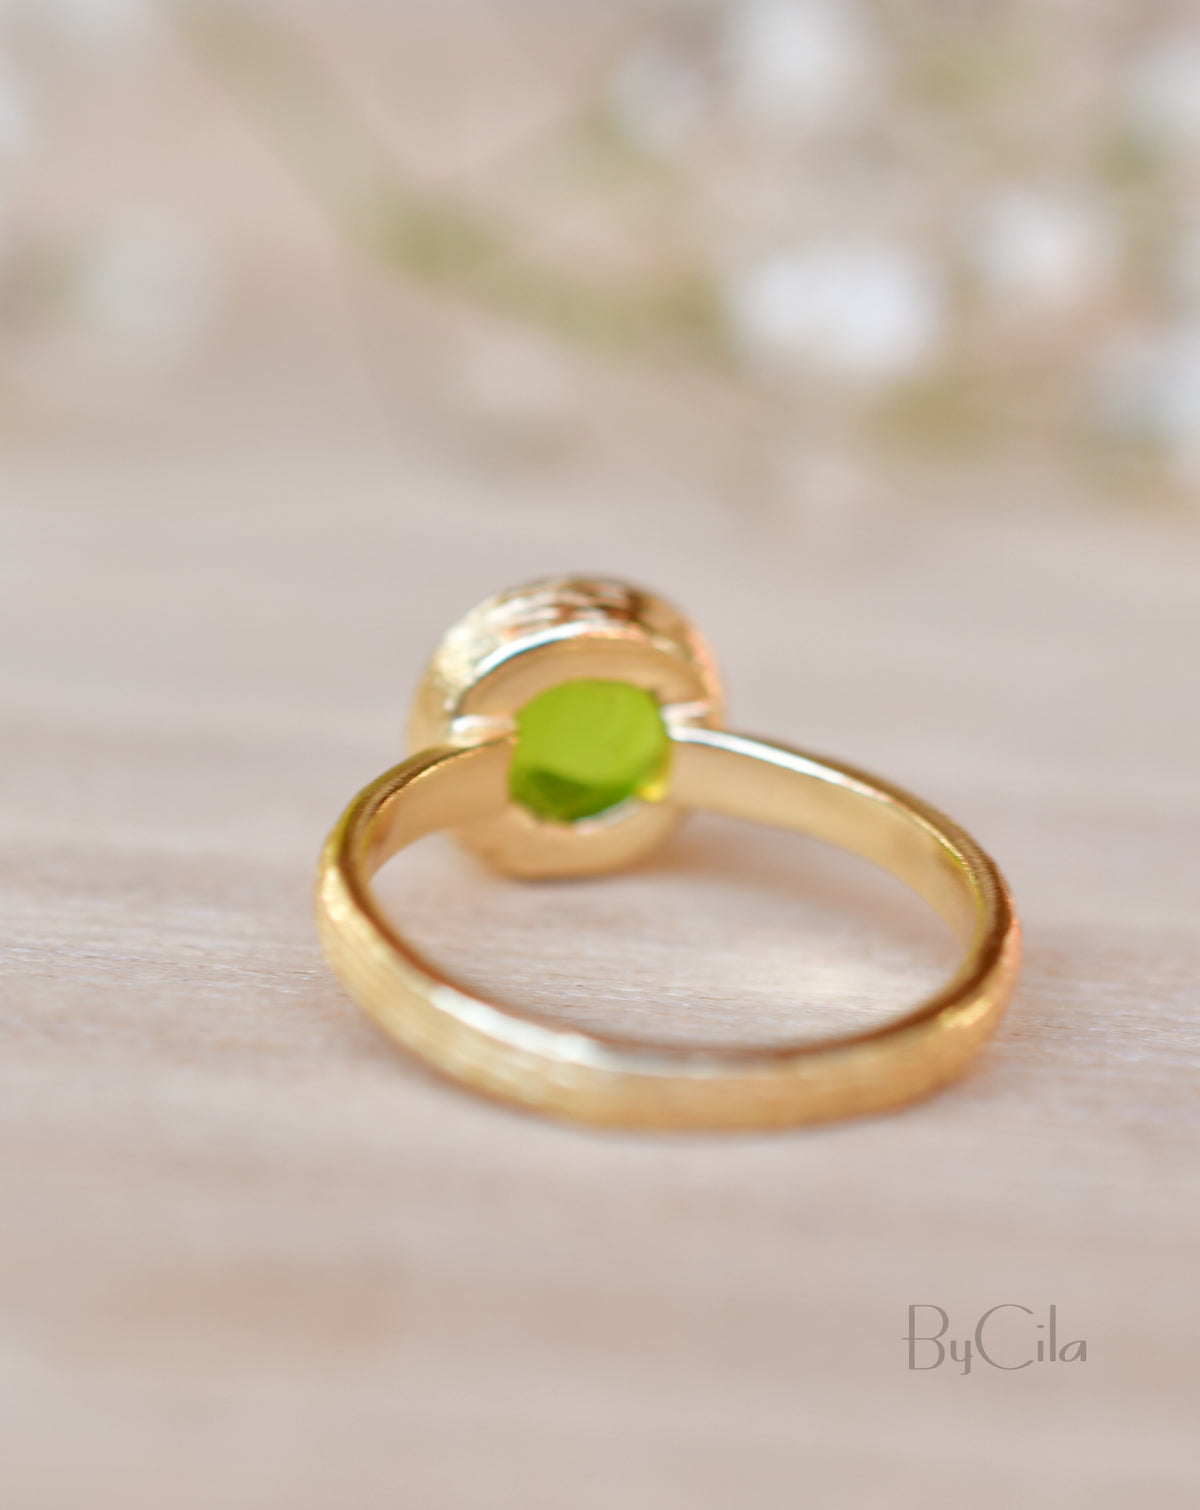 Leticia Ring * Peridot hydro * Gold Plated 18k * SBJR116